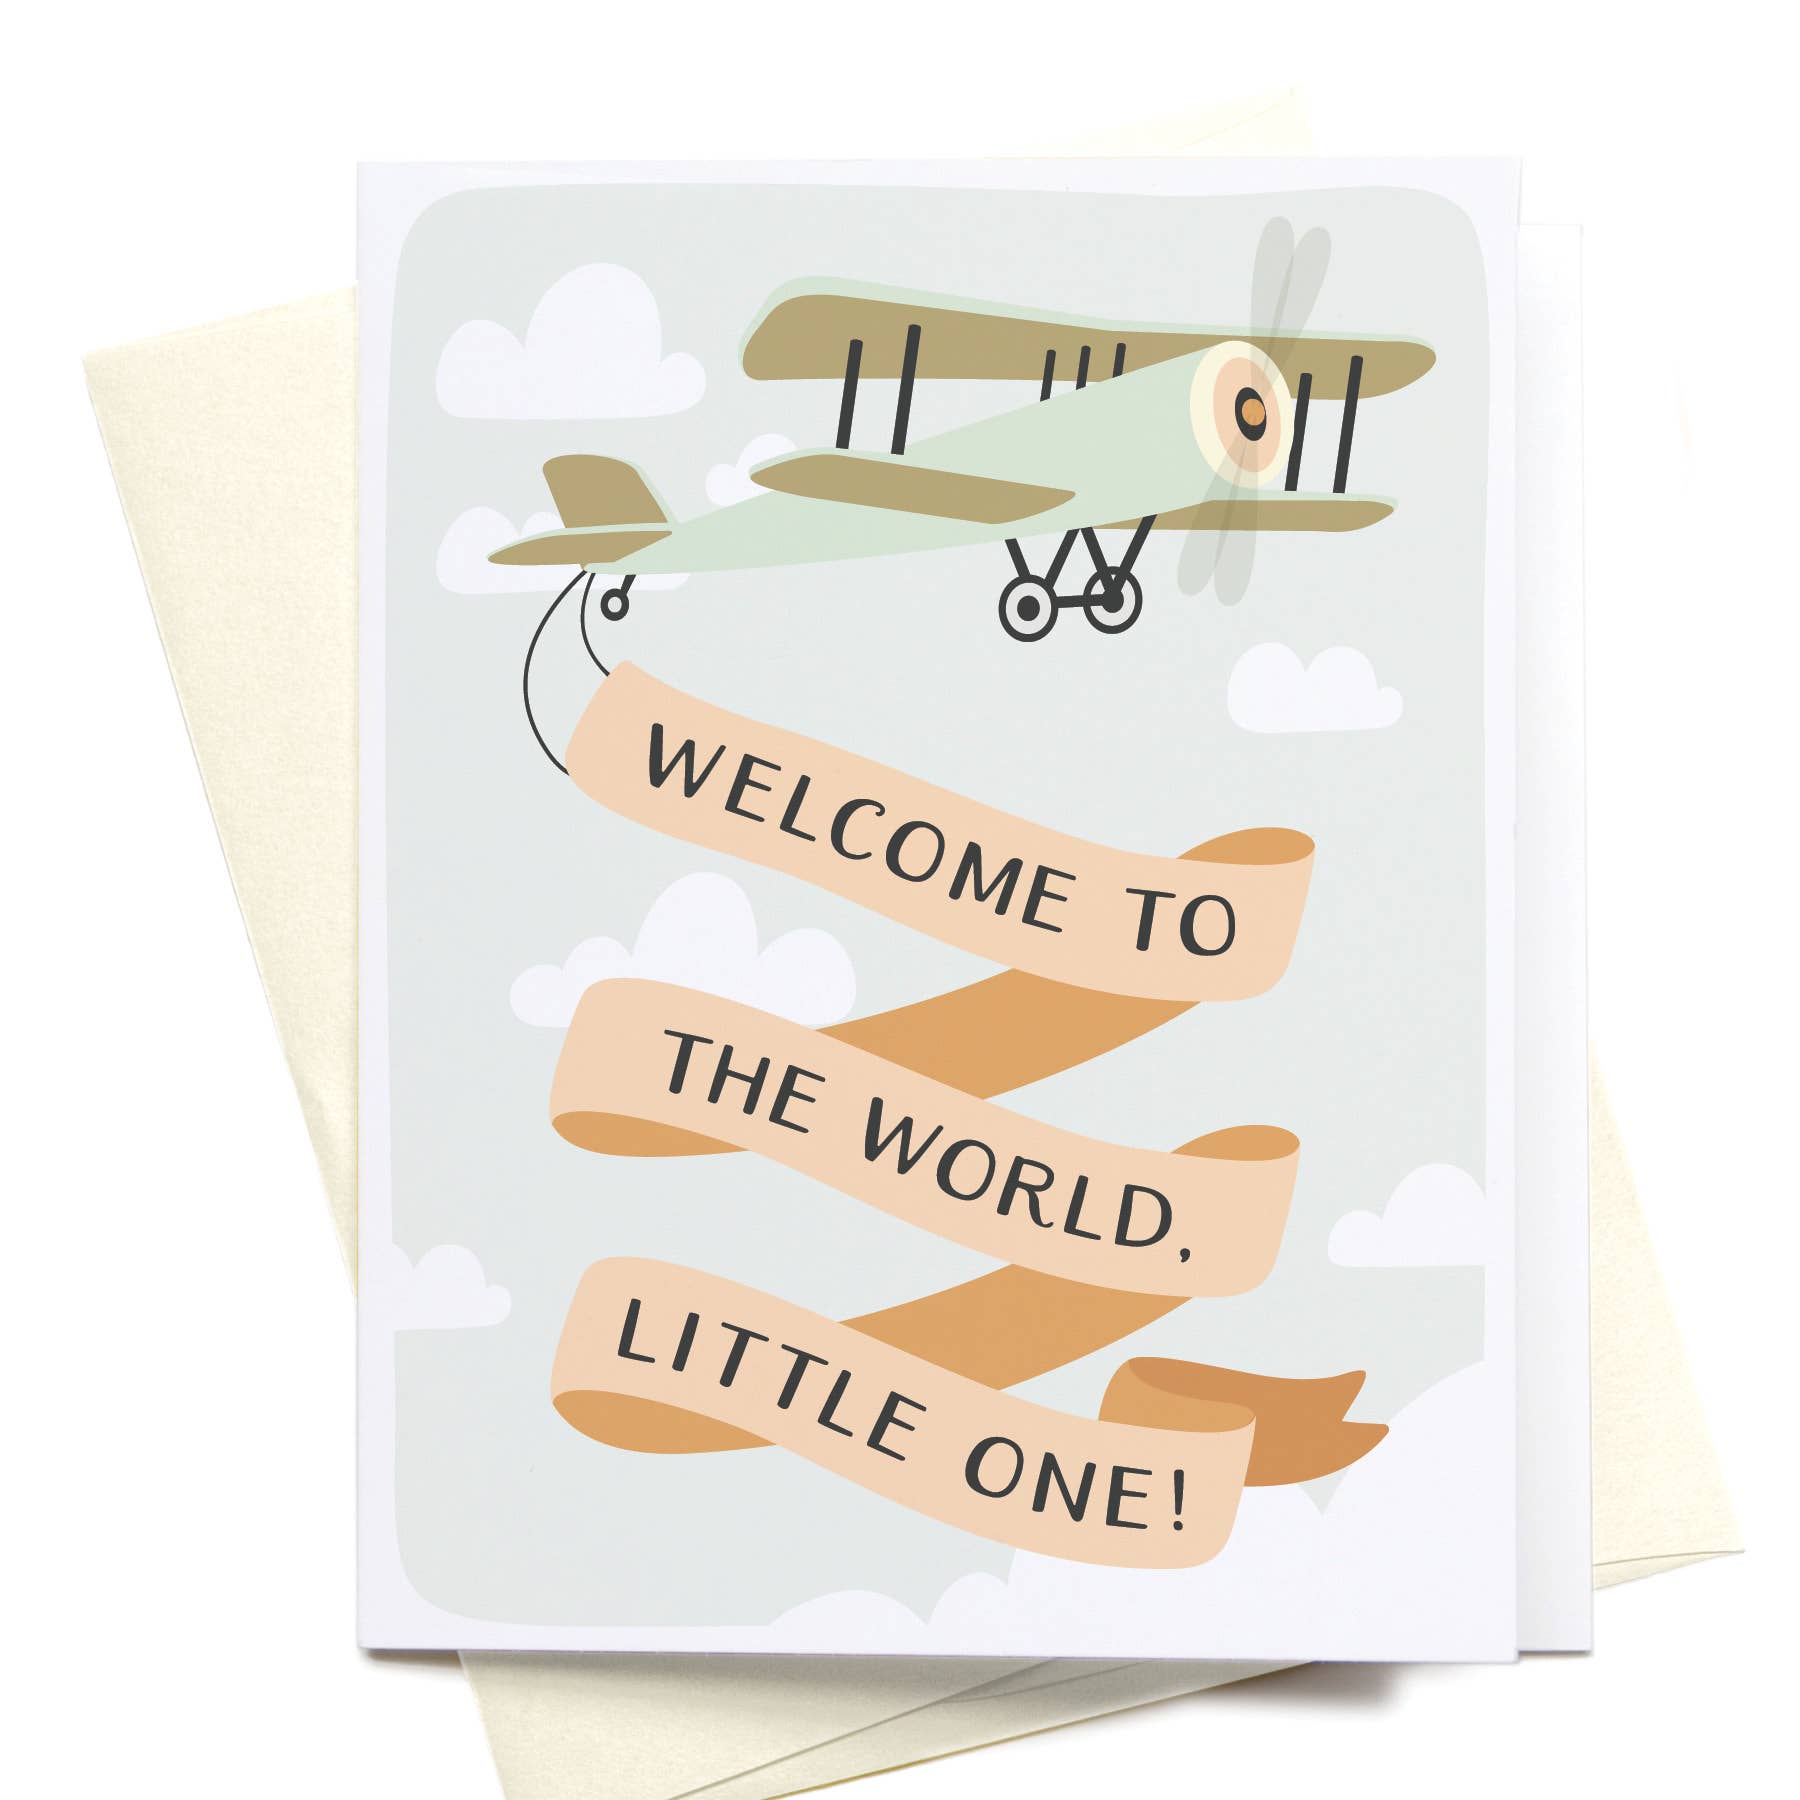 Welcome to the World, Little One! Greeting Card